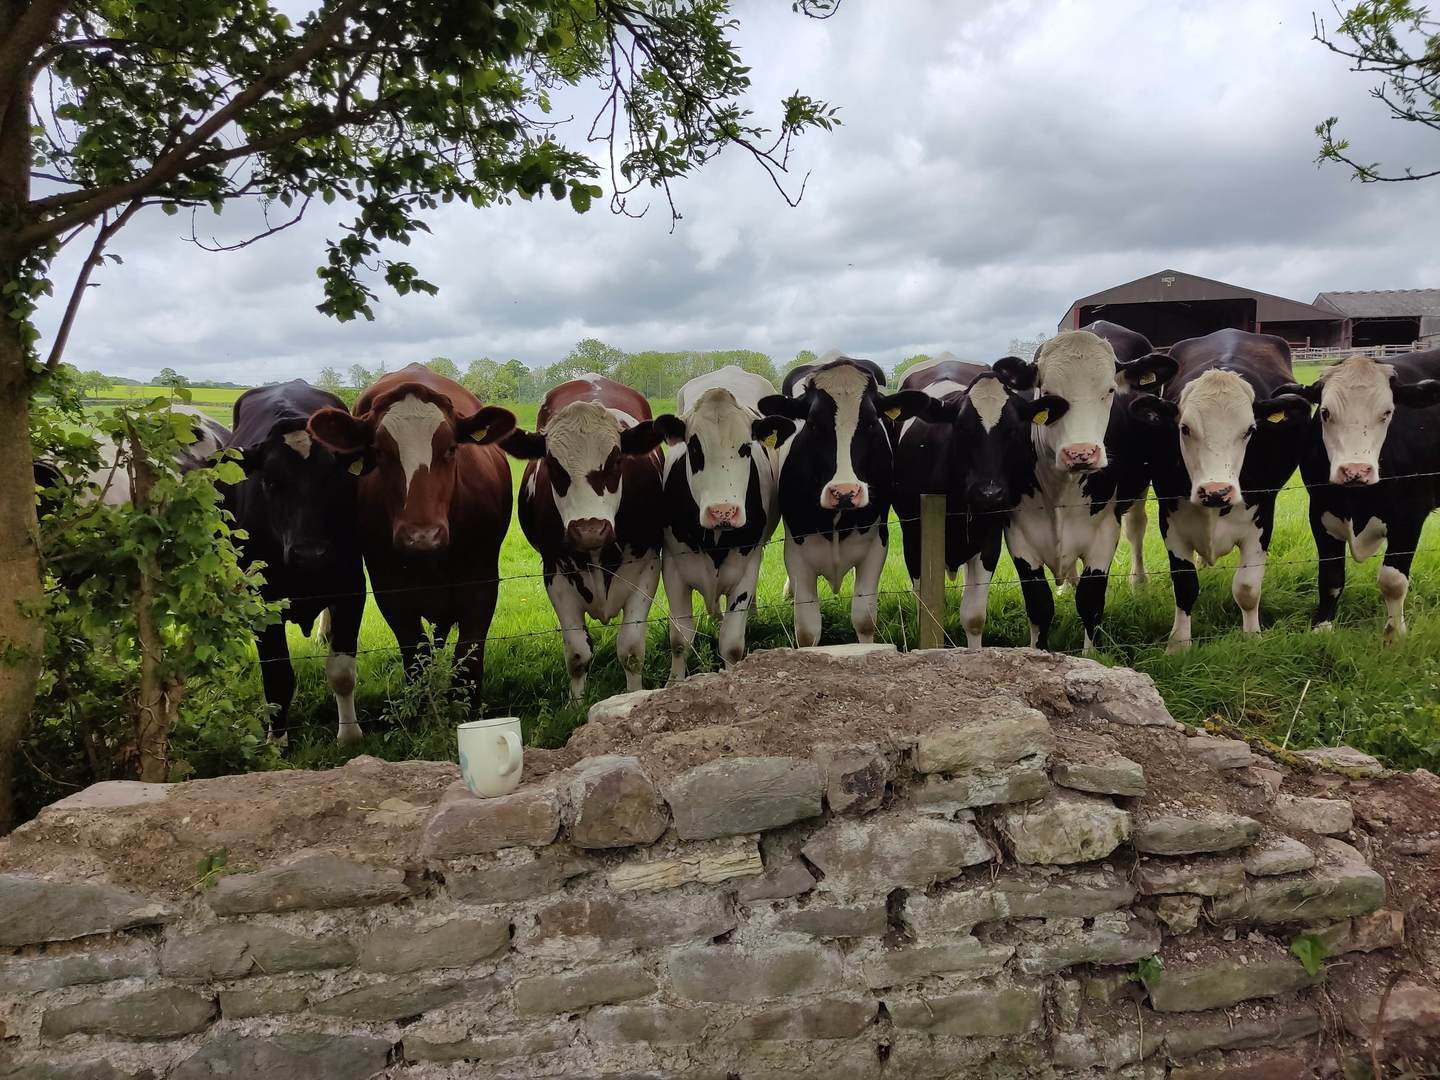 Some cows watching stonework in Somerset